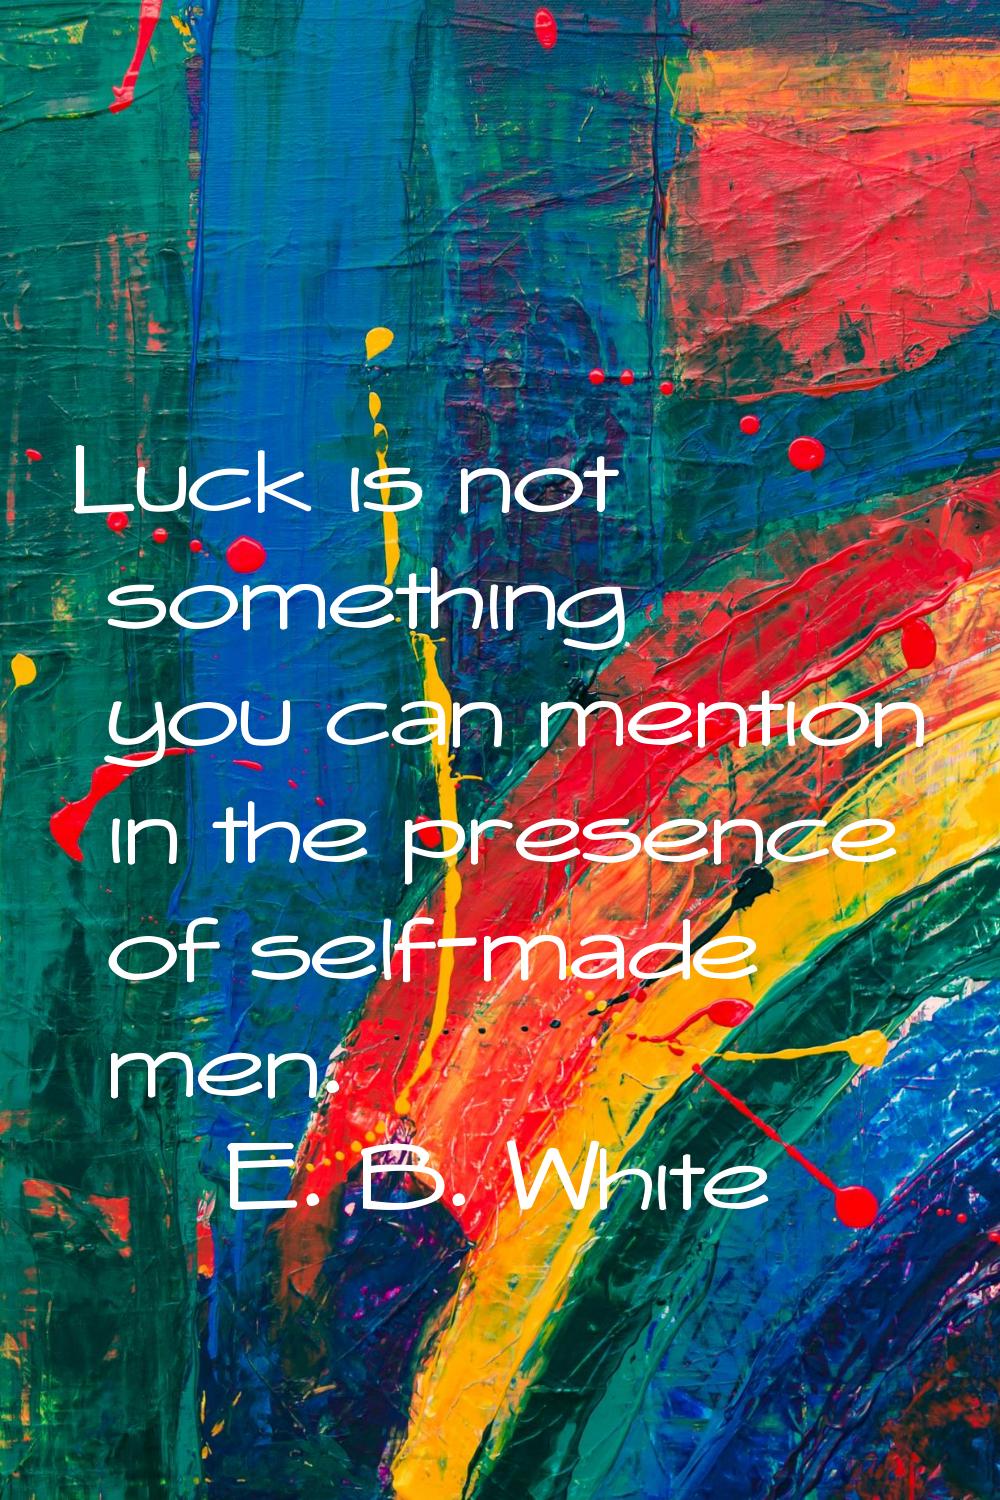 Luck is not something you can mention in the presence of self-made men.